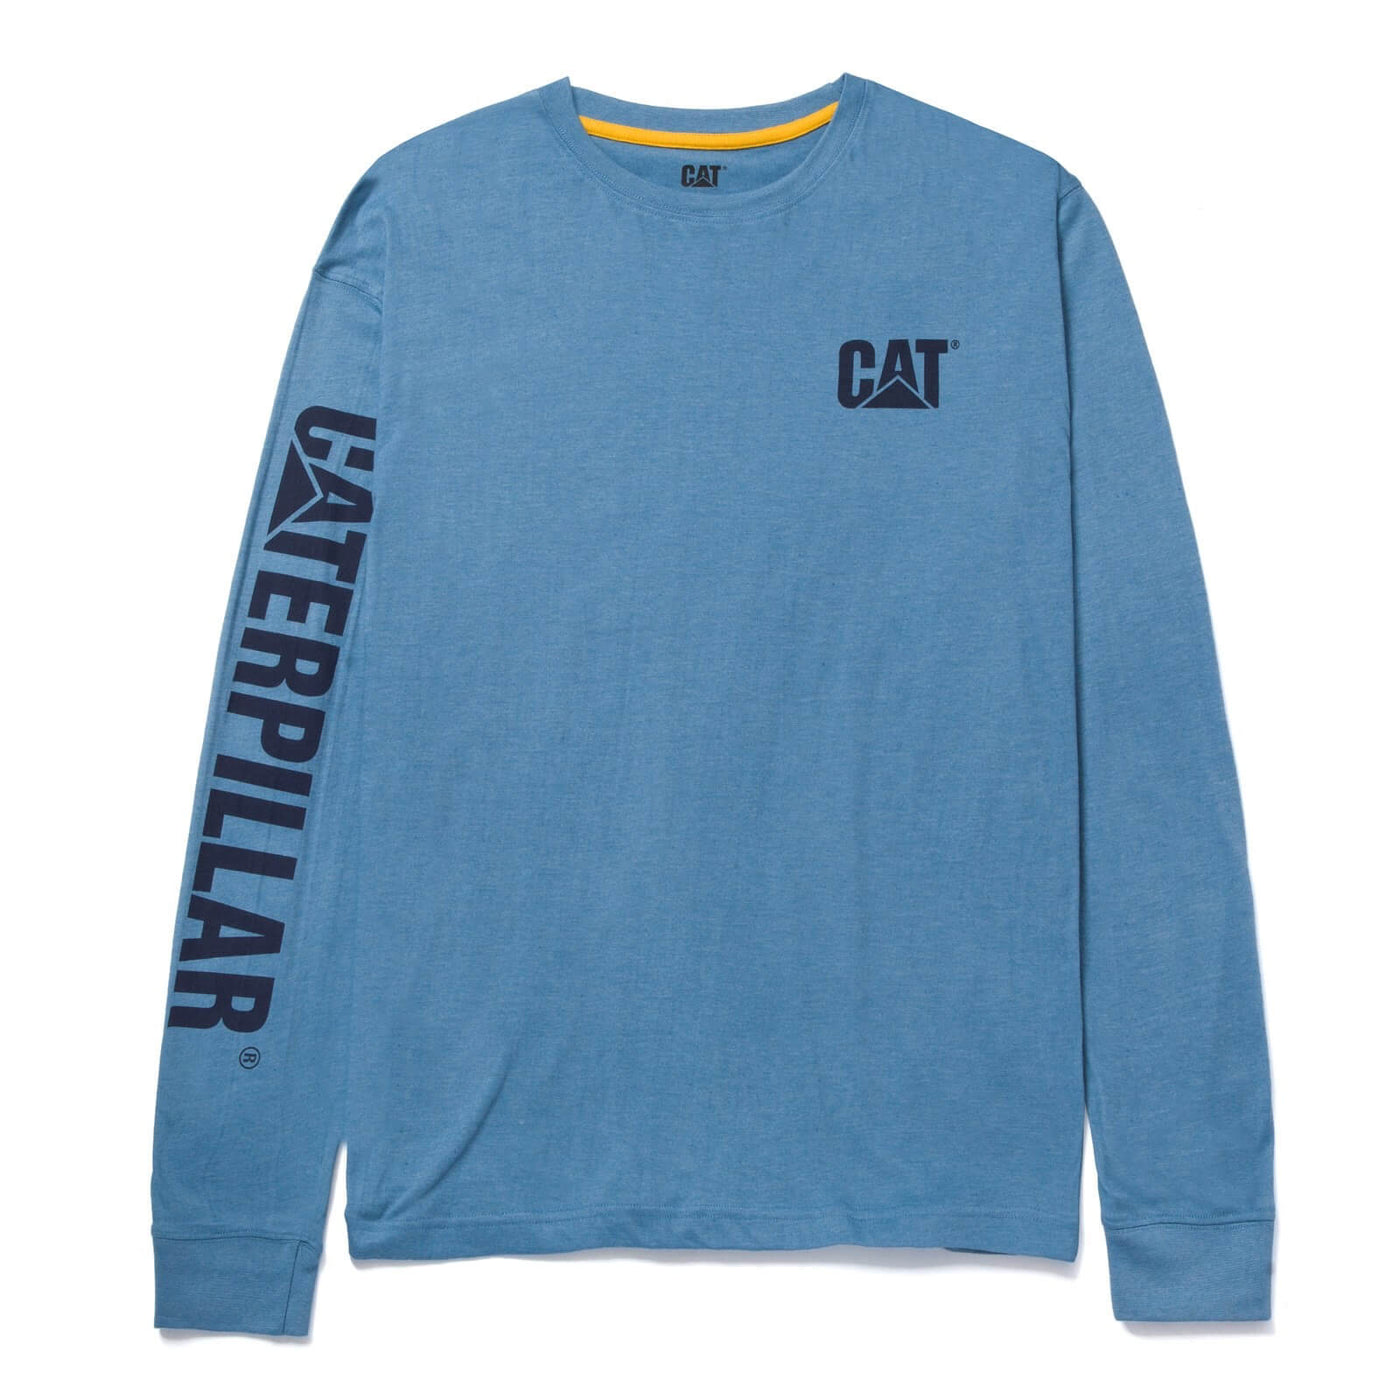 Caterpillar Trademark Lomng Sleeved Banner T-Shirt 1510034 Teal 1#colour_teal